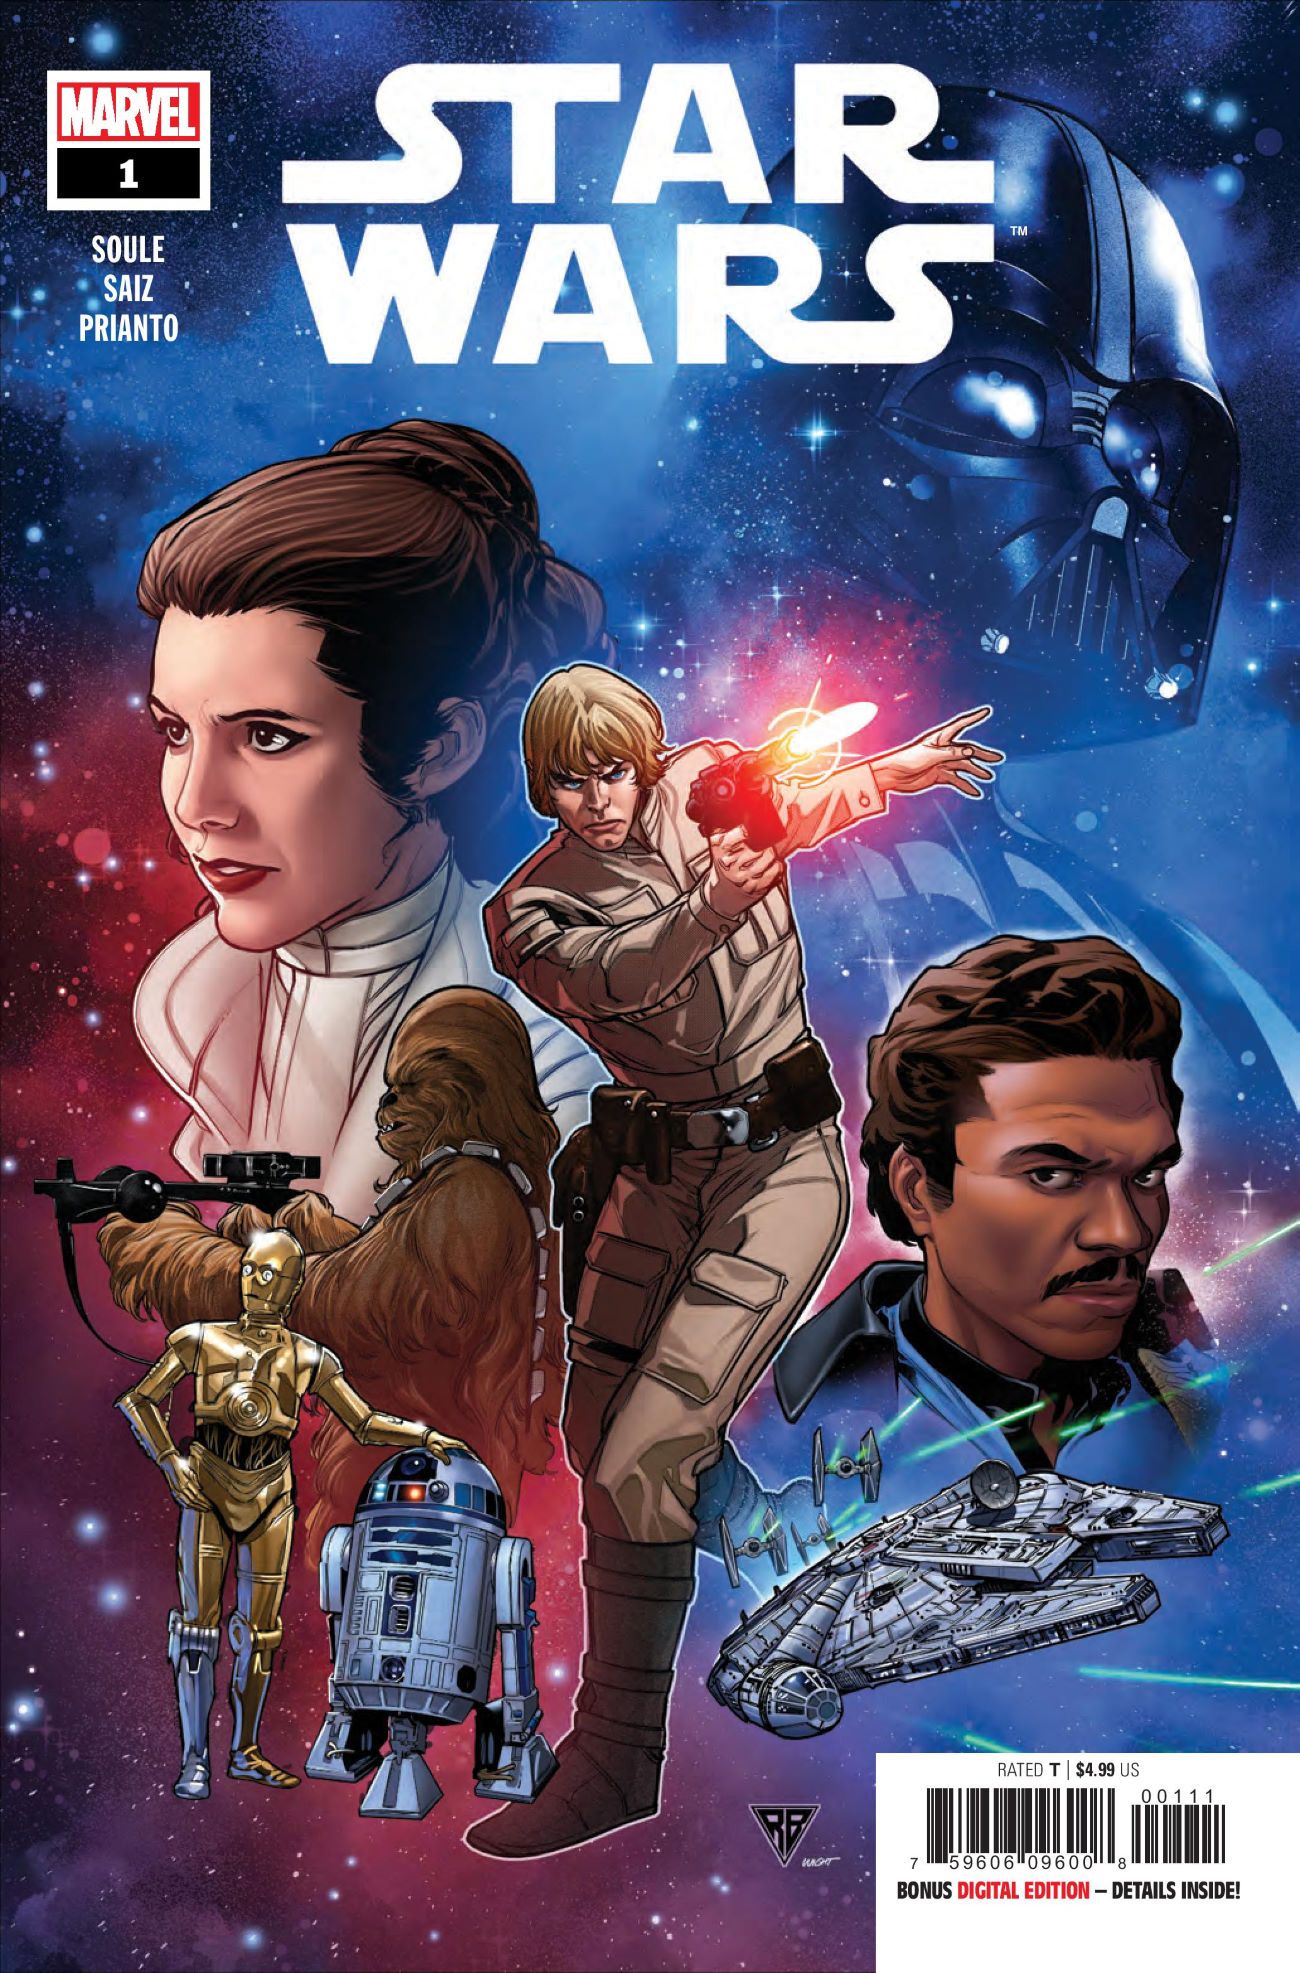 Preview: STAR WARS #1 Shows What Happened After Empire